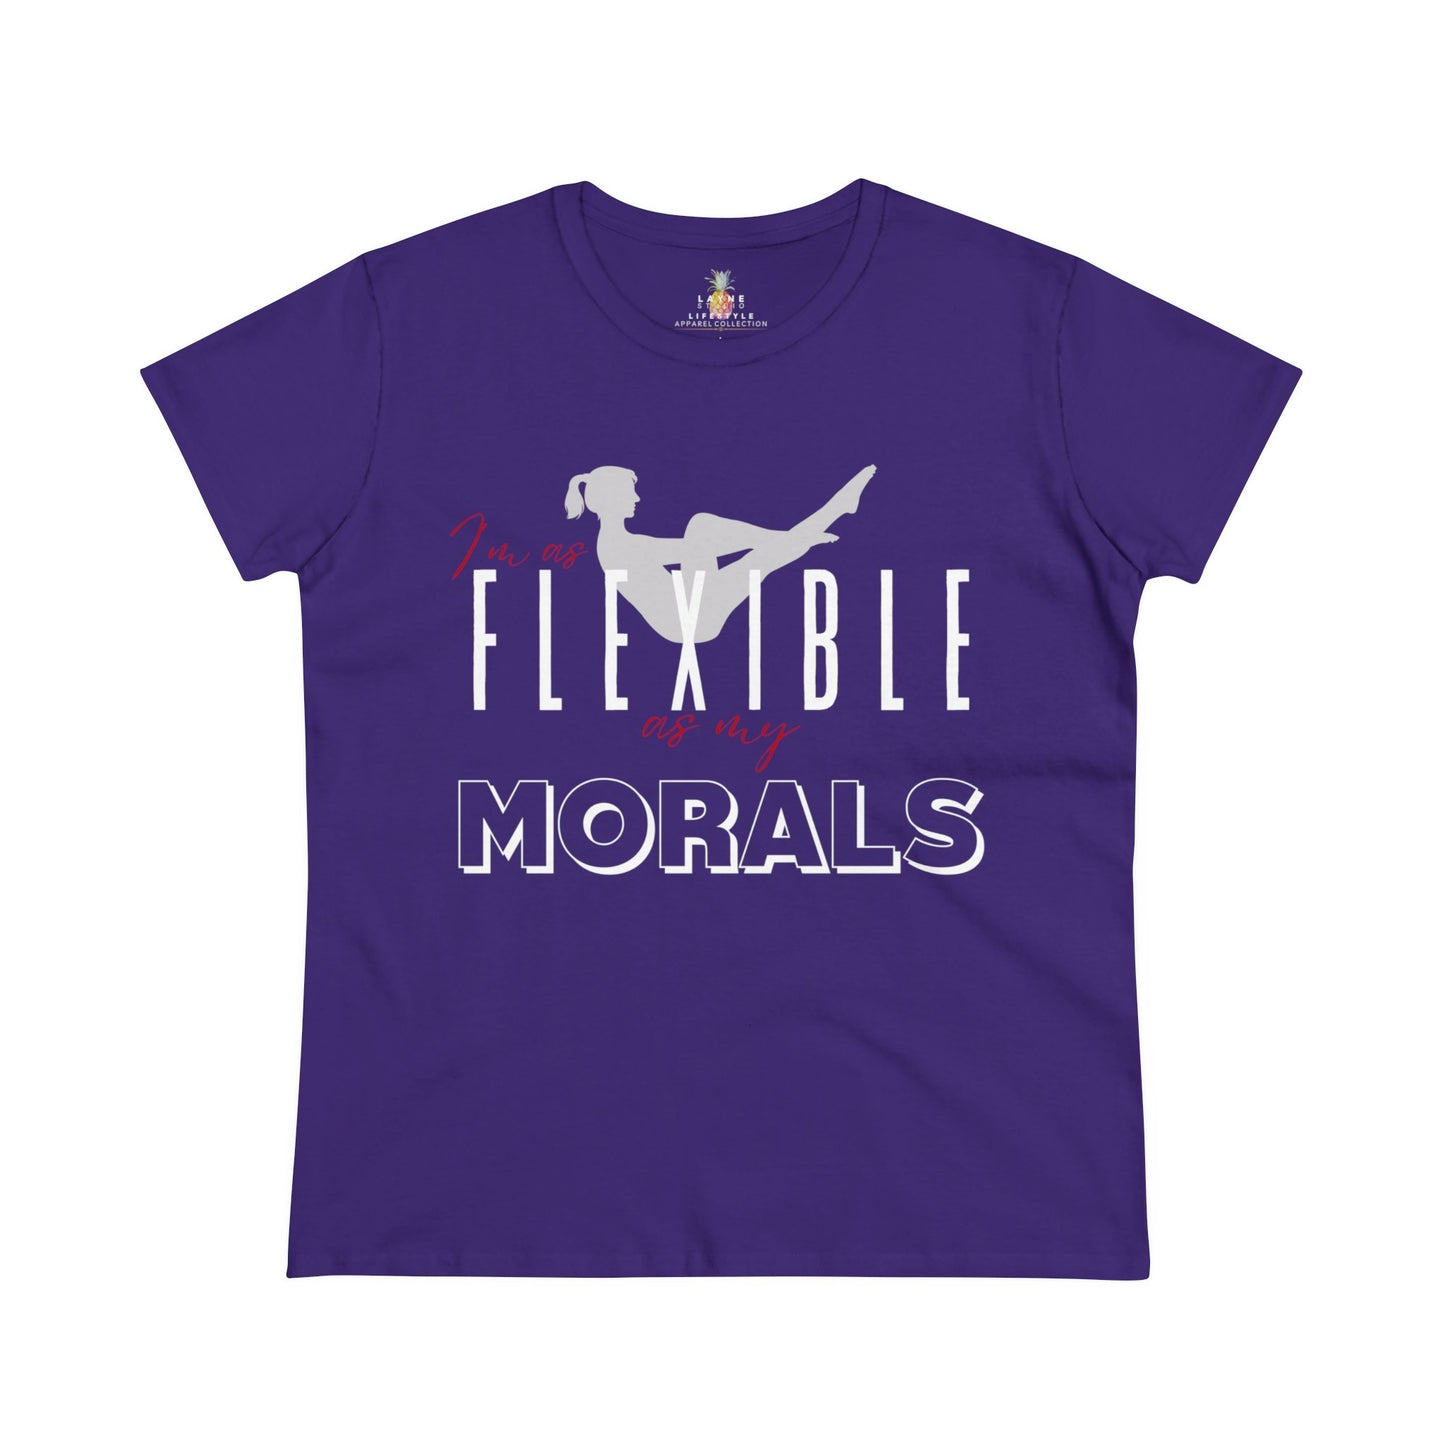 "I'm As Flexible As My Morals" Graphic Women's Midweight Cotton Tee